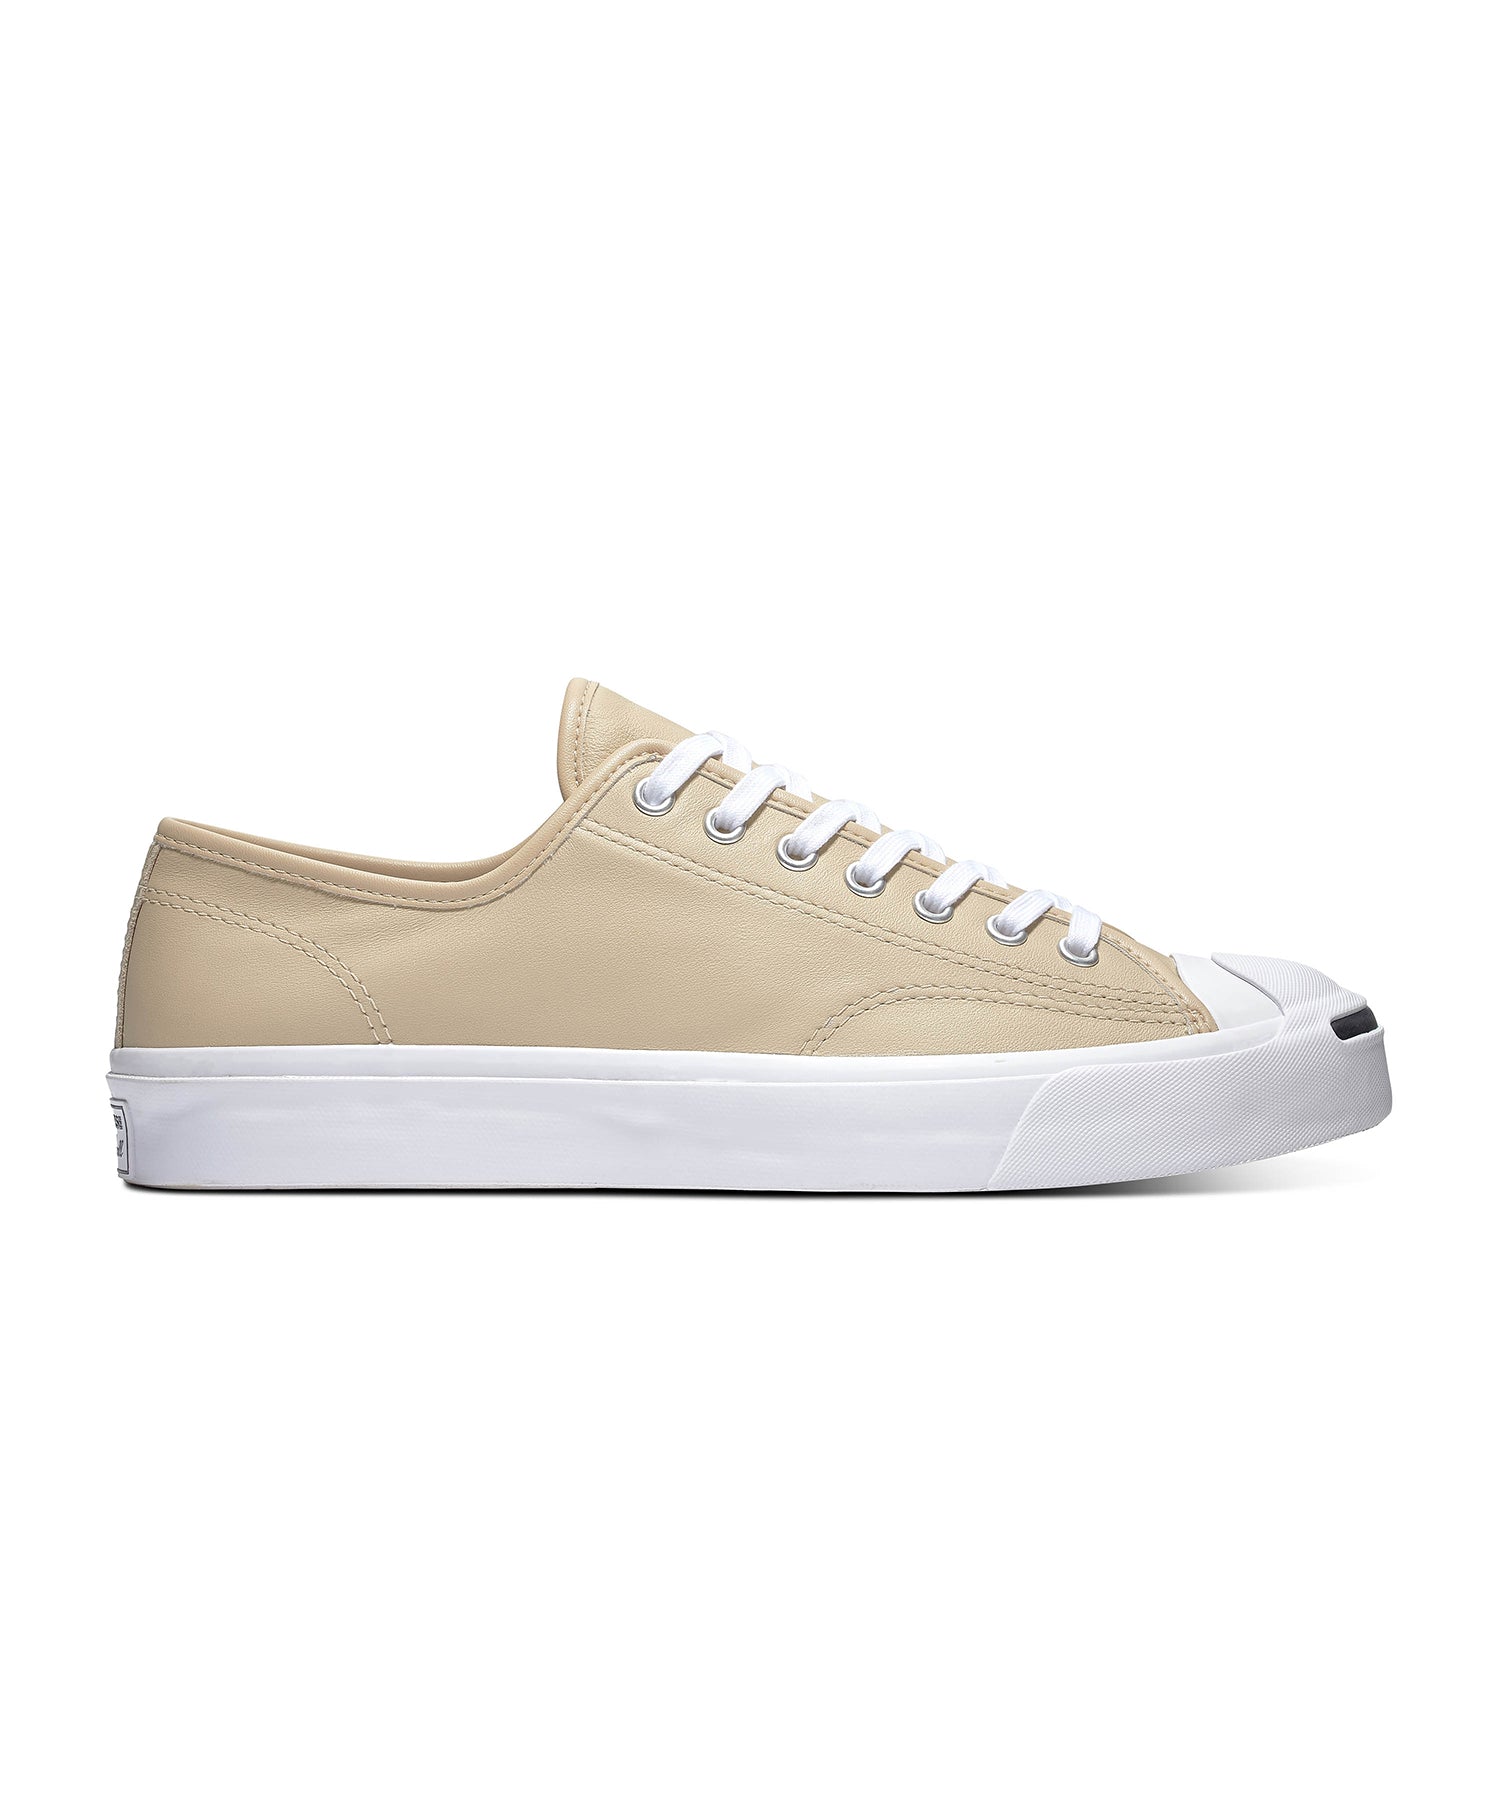 jack purcell 70